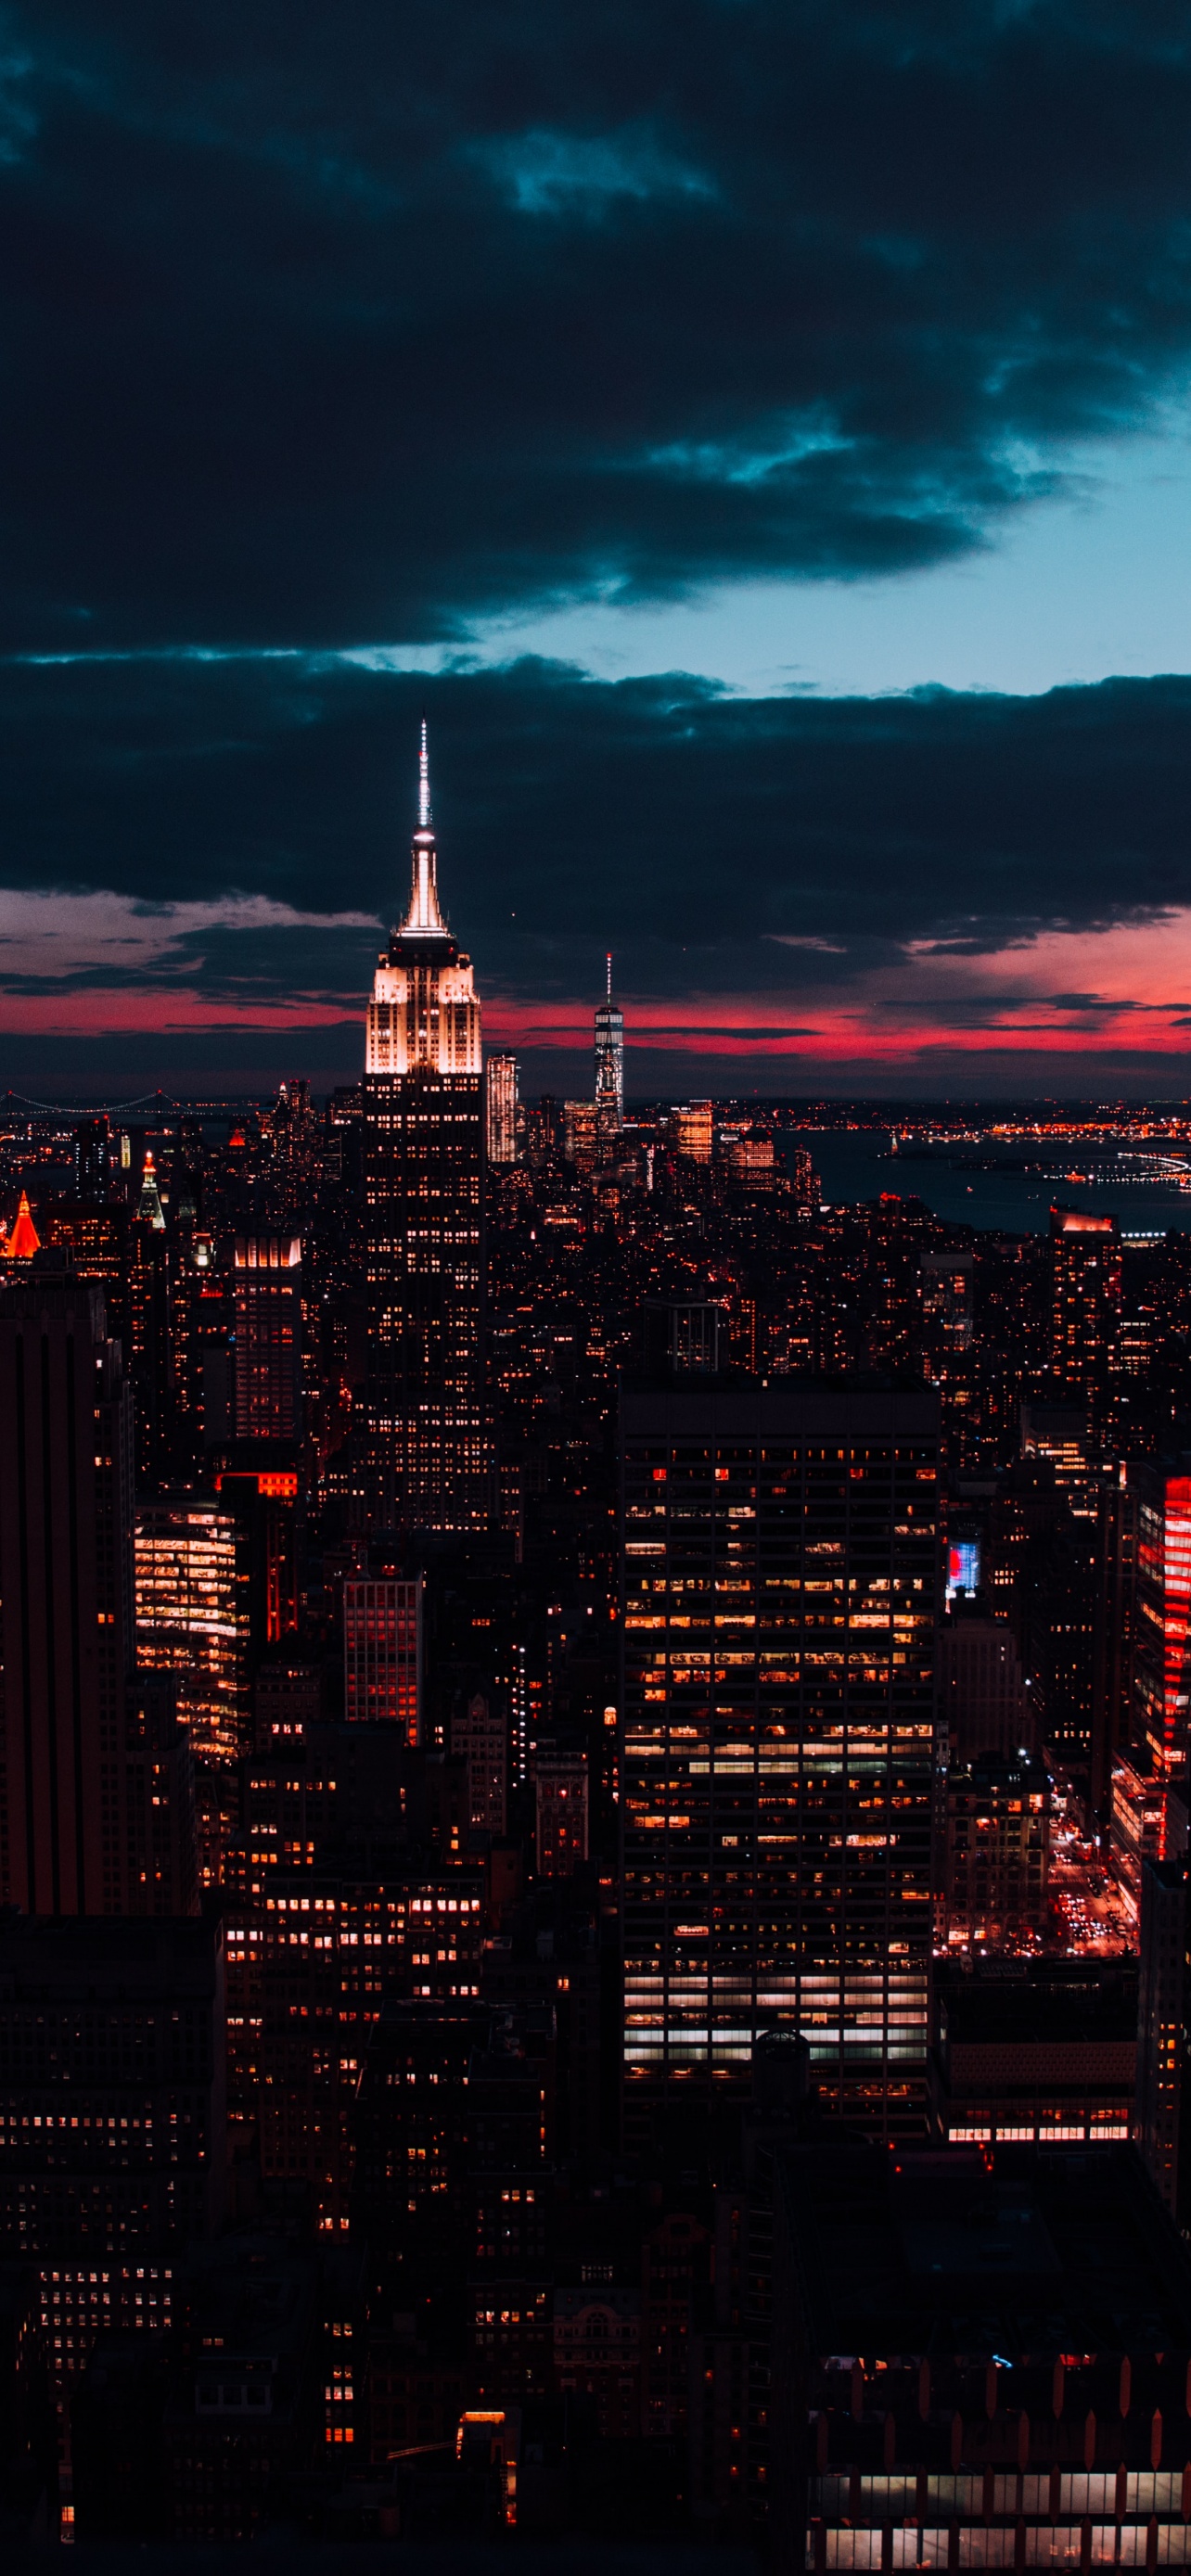 New York Skyline Wallpaper for iPhone  FREE and HD Quality